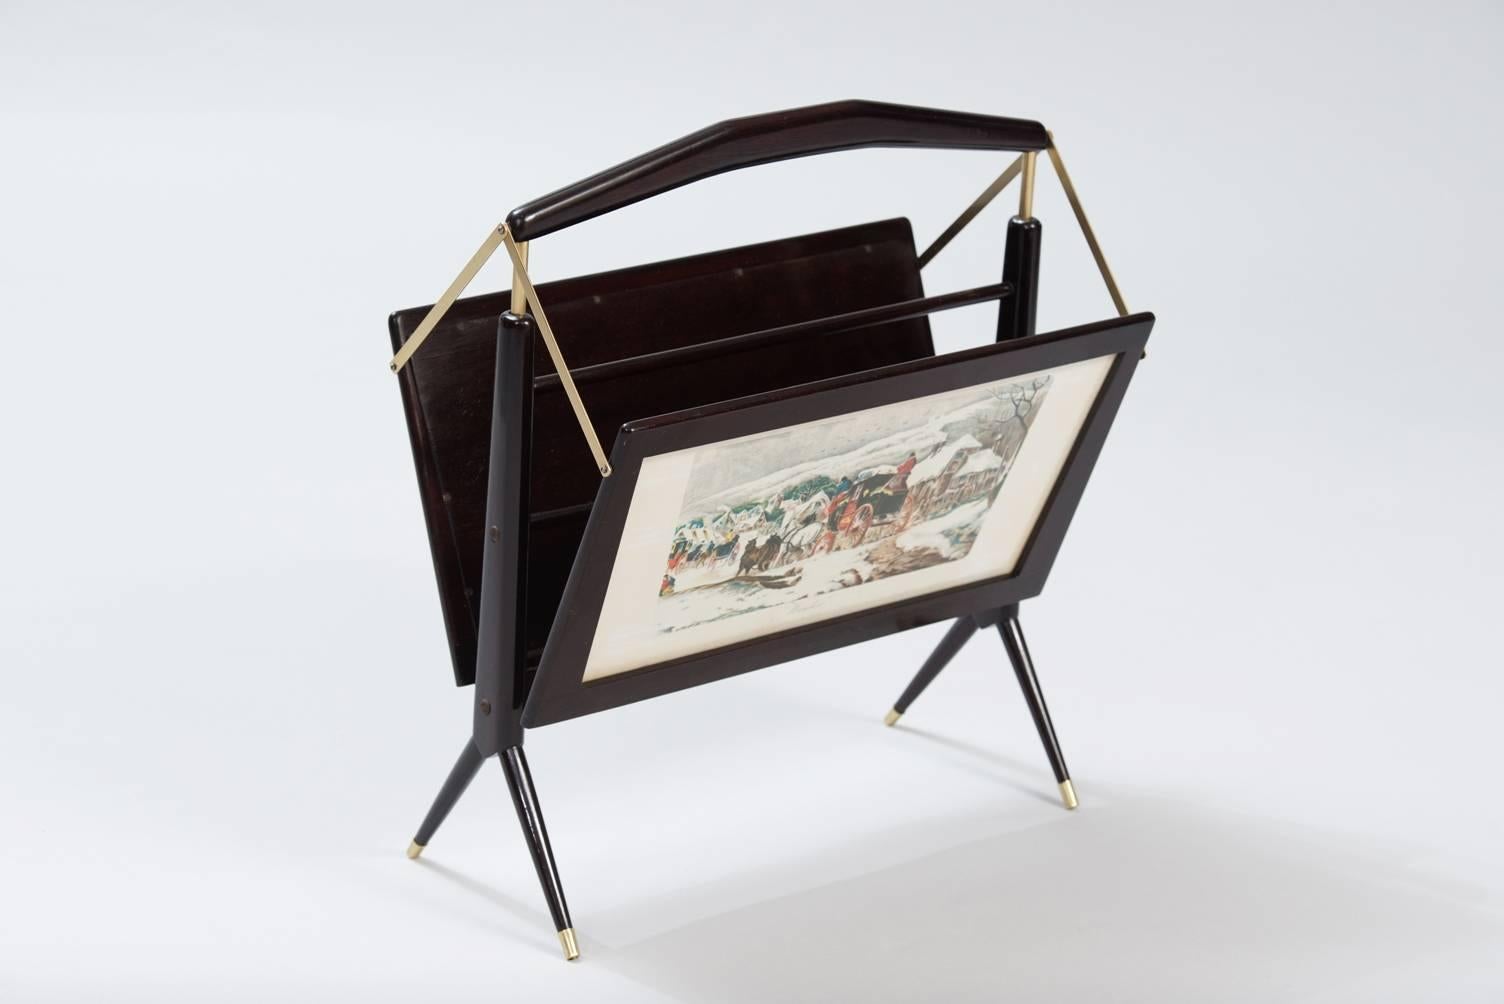 Foldable magazine rack in the style of Ico Parisi.